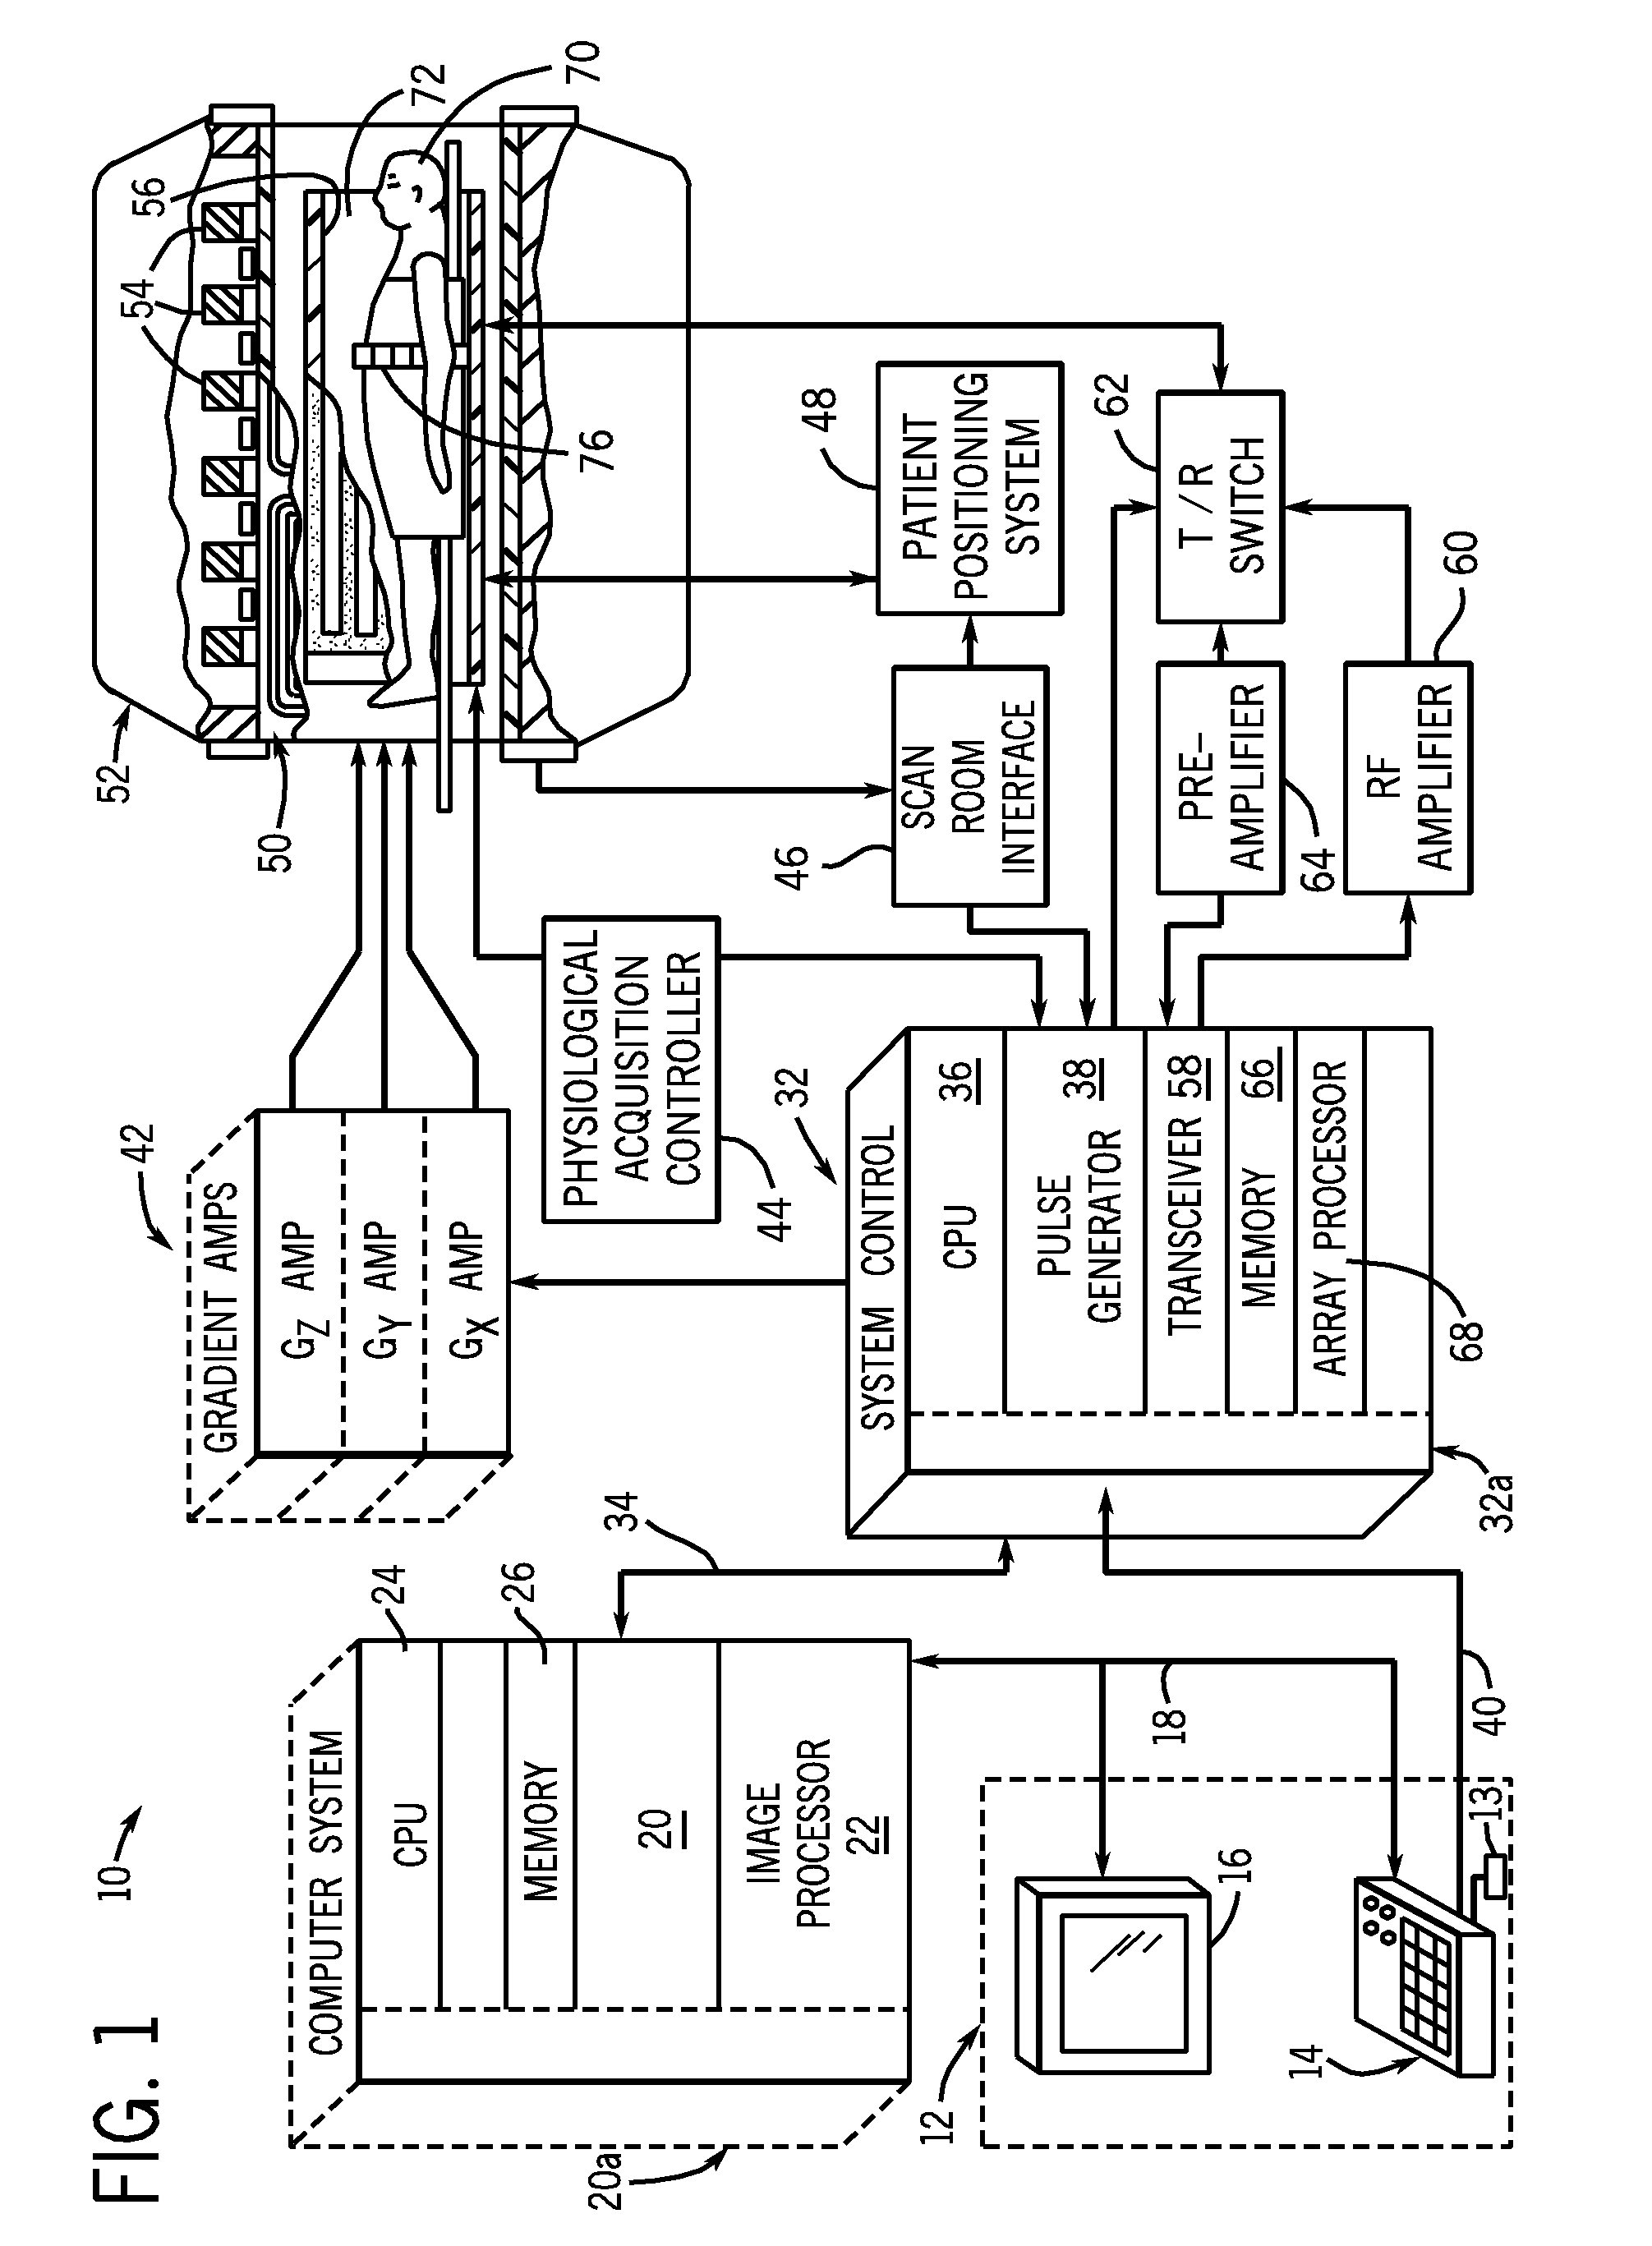 System, method and apparatus for compensating for drift in a main magnetic field in an MRI system